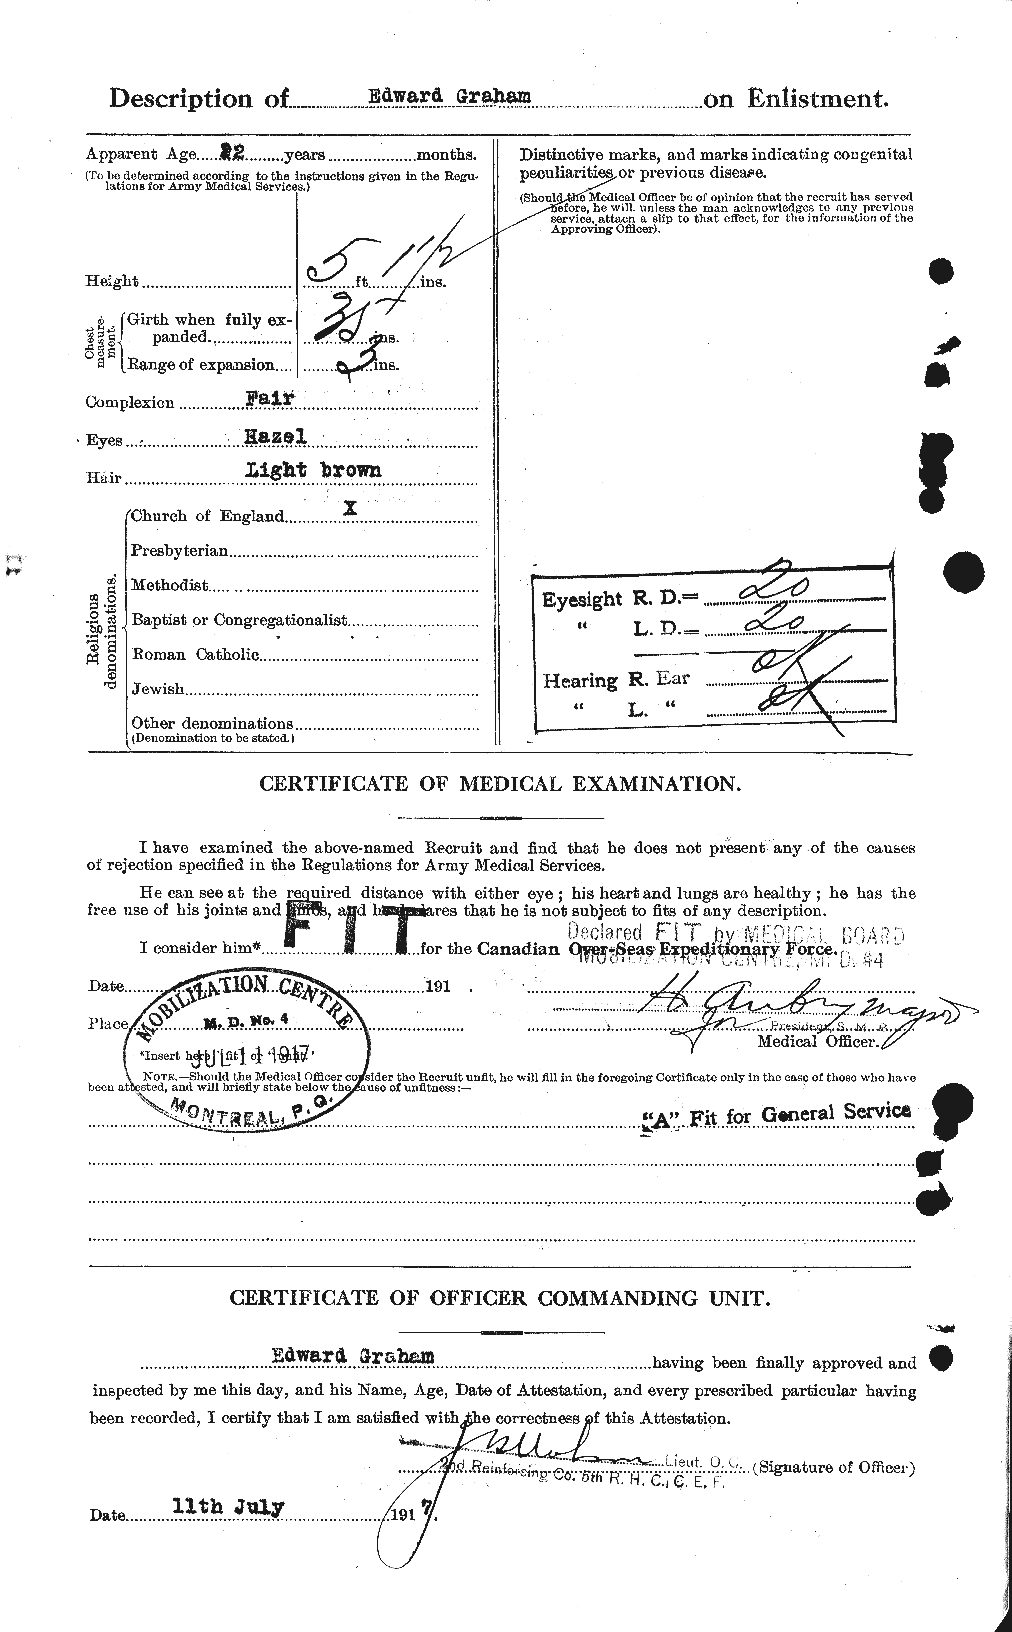 Personnel Records of the First World War - CEF 353864b